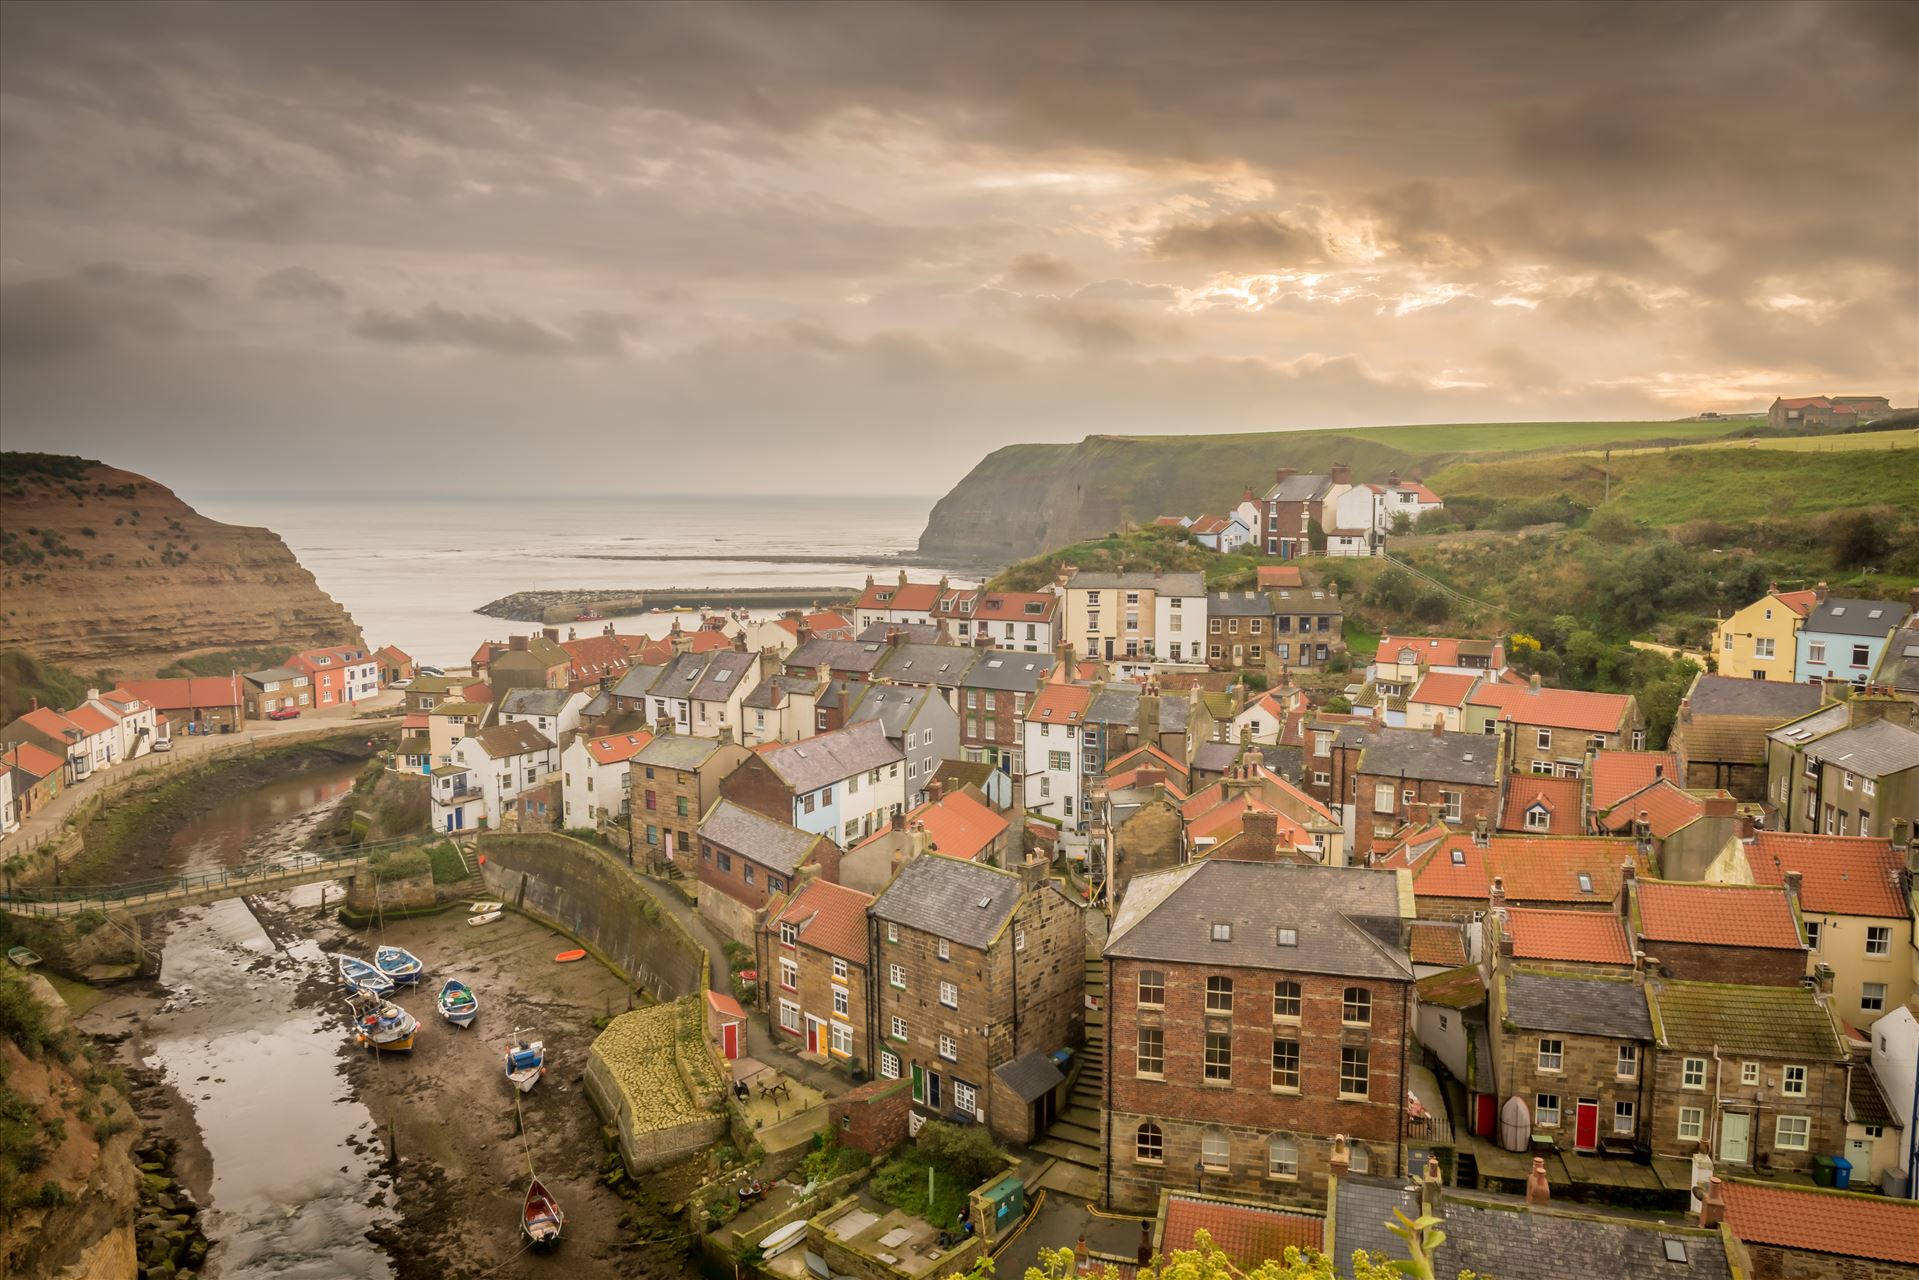 Staithes - With its higgledy-piggledy cottages and winding streets, Staithes has the air of a place lost in time & was once one of the largest fishing ports on the North East coast. by philreay